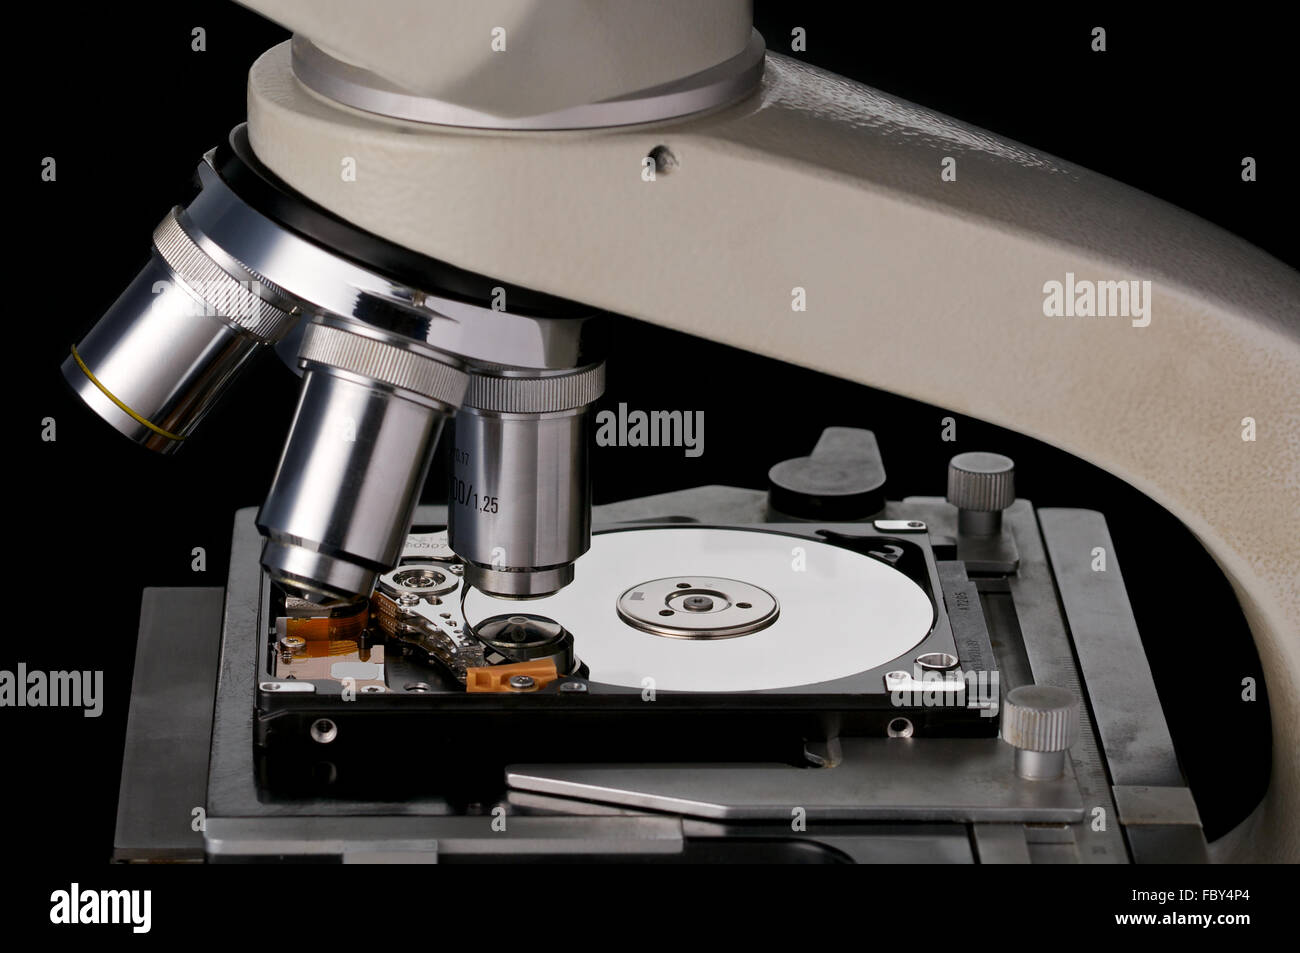 Hard Disk under a Microscope Stock Photo